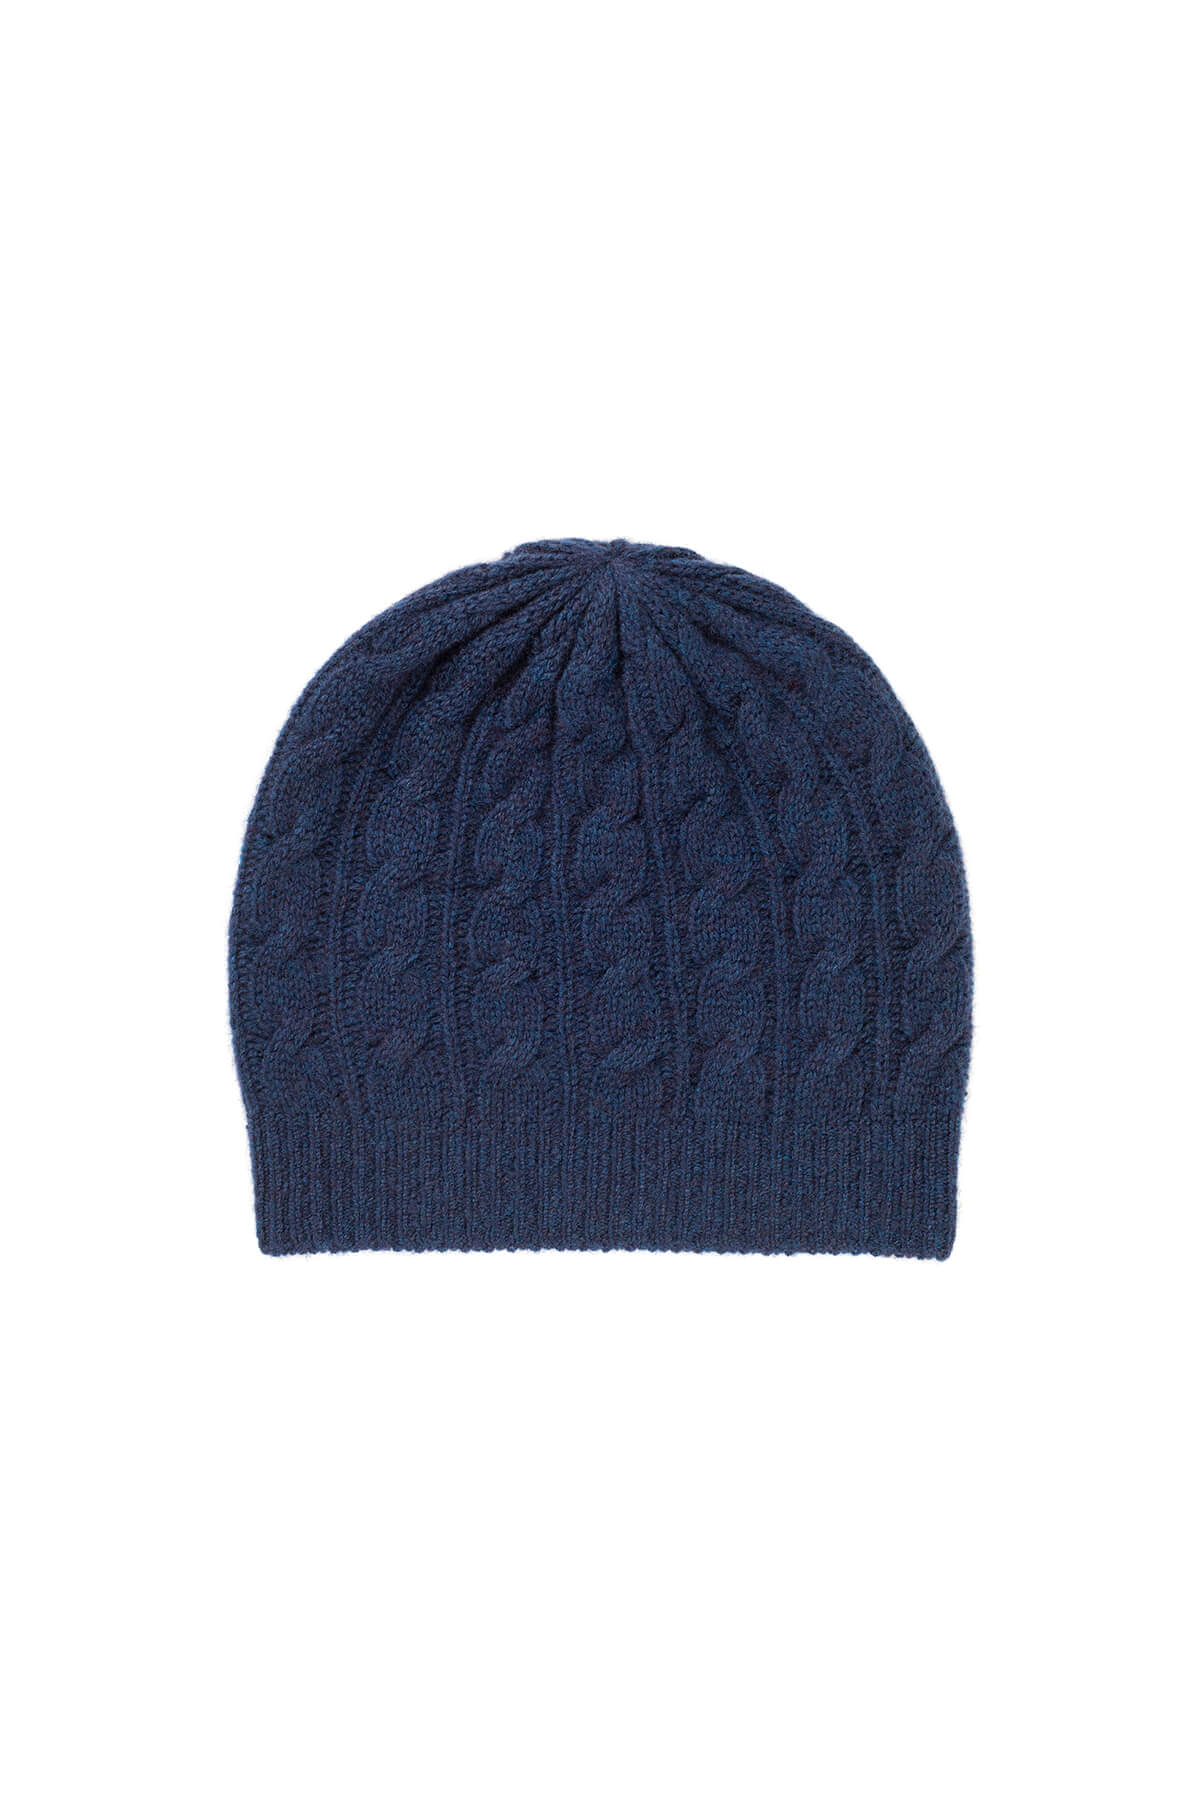 Johnstons of Elgin’s Ocean blue Gauzy Cable Cashmere Relaxed Beanie on a white background HAY03300HD7244